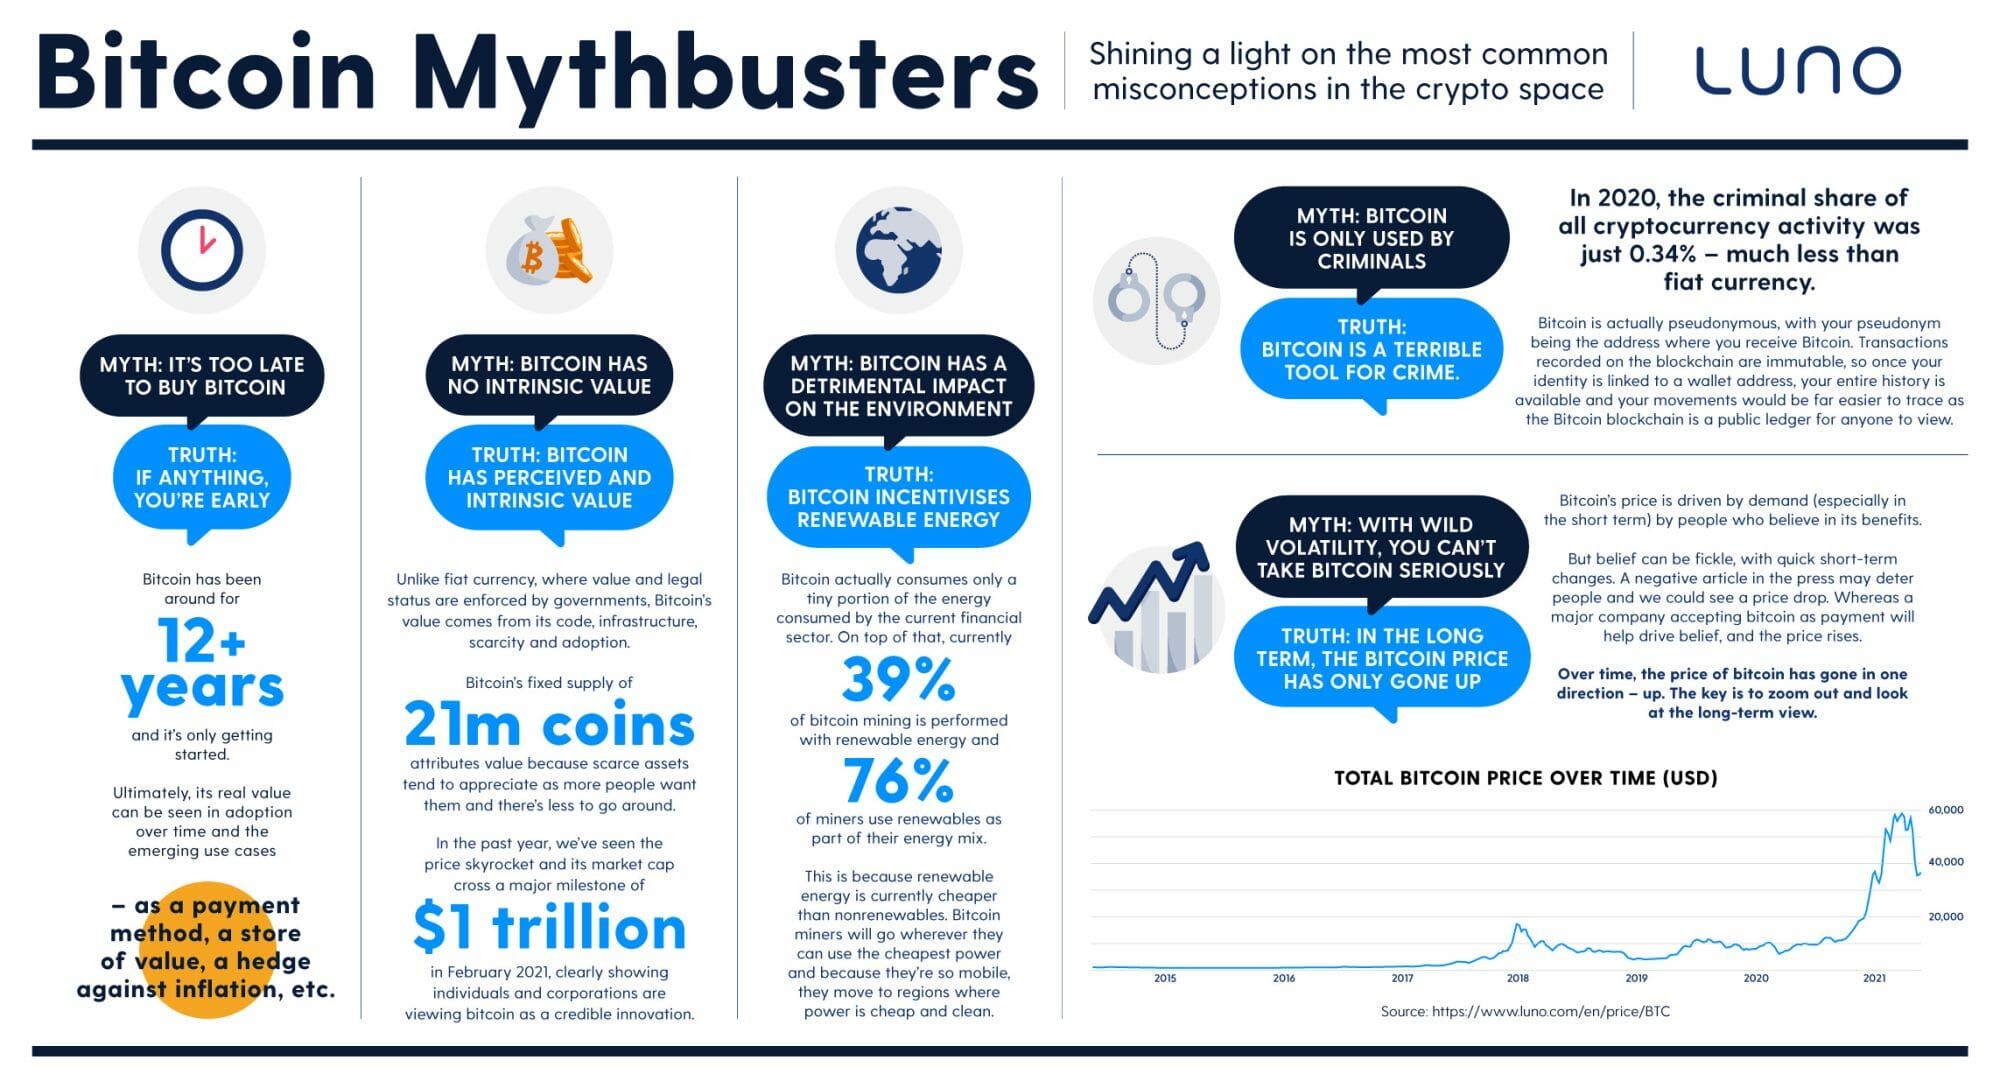 Cryptocurrency mythbusters 0.0001 btc to dollar